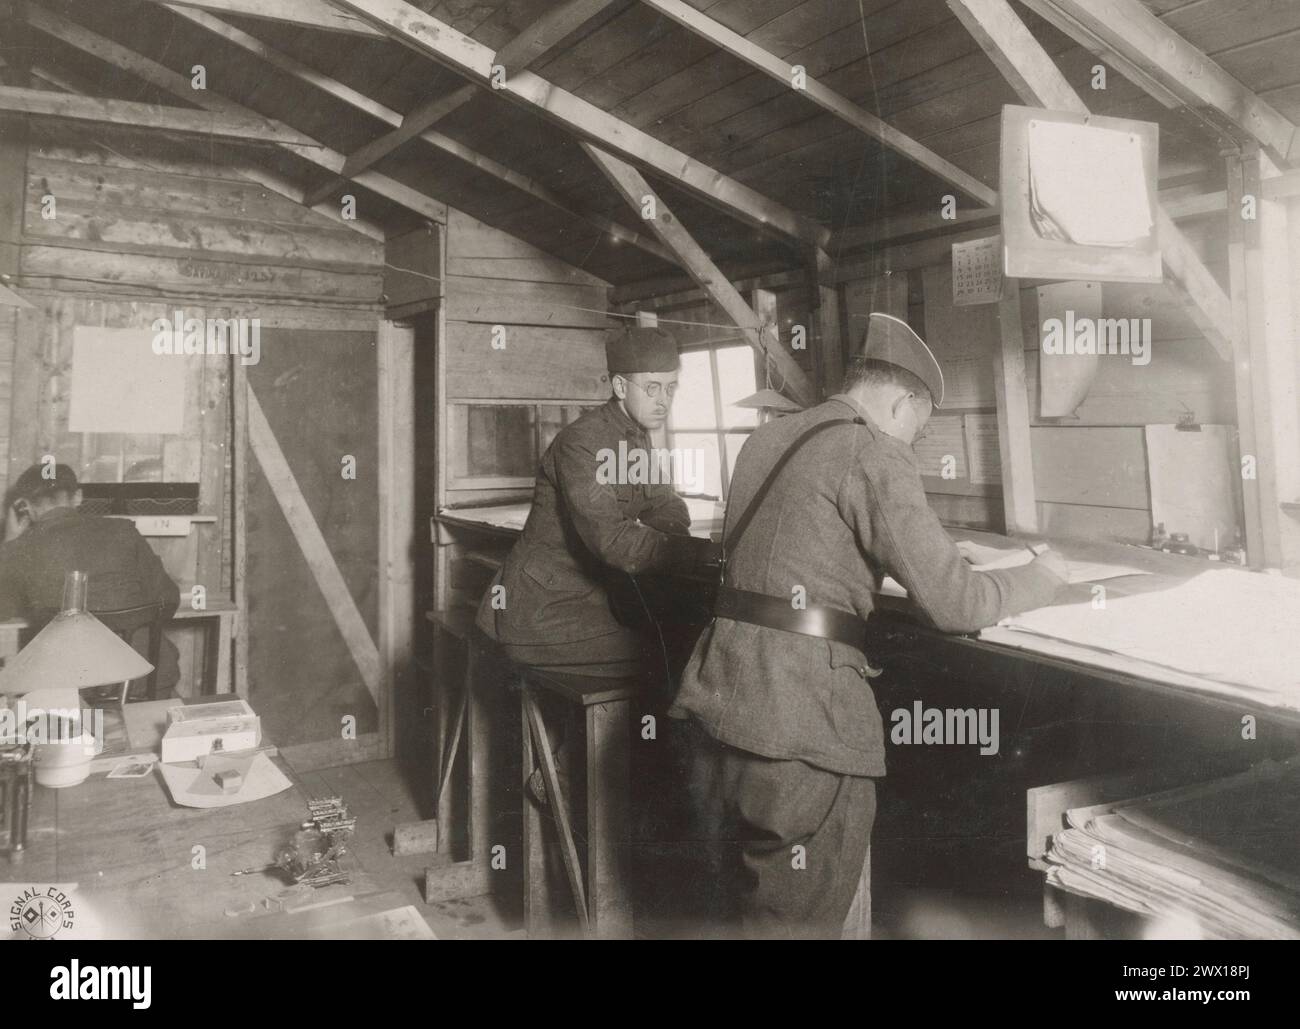 WW I Photos: Weather forecasting room where weather maps are made. Meteorlogical station 1 km east of Colombey-les-Belles France ca. 1918 Stock Photo